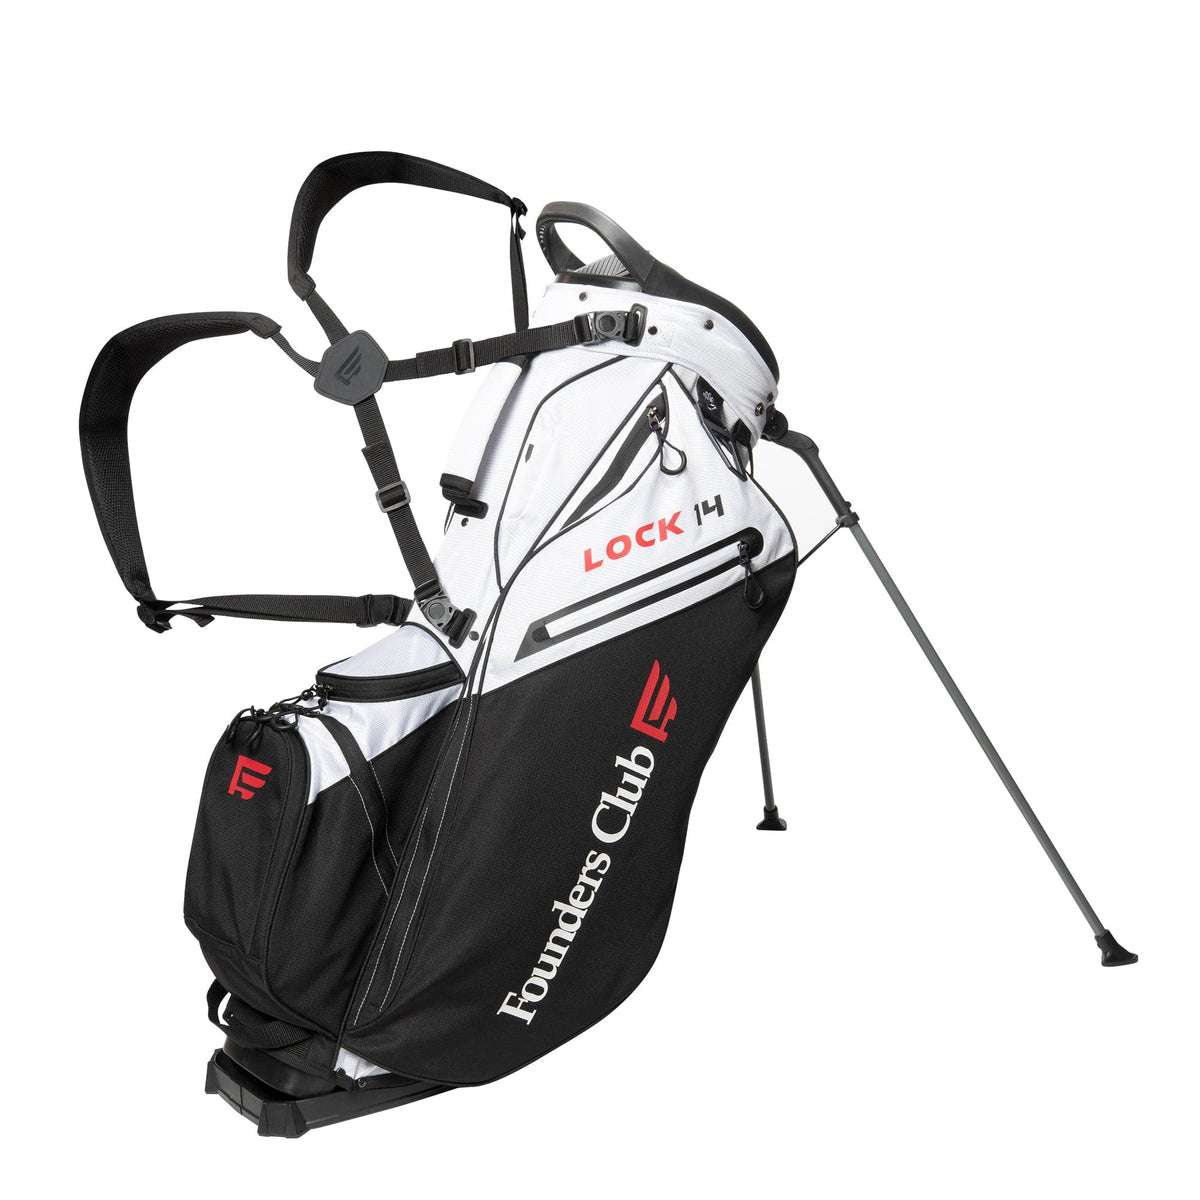 Founders Club Golf Lock 14 Stand Bag with Shaft Lock Top